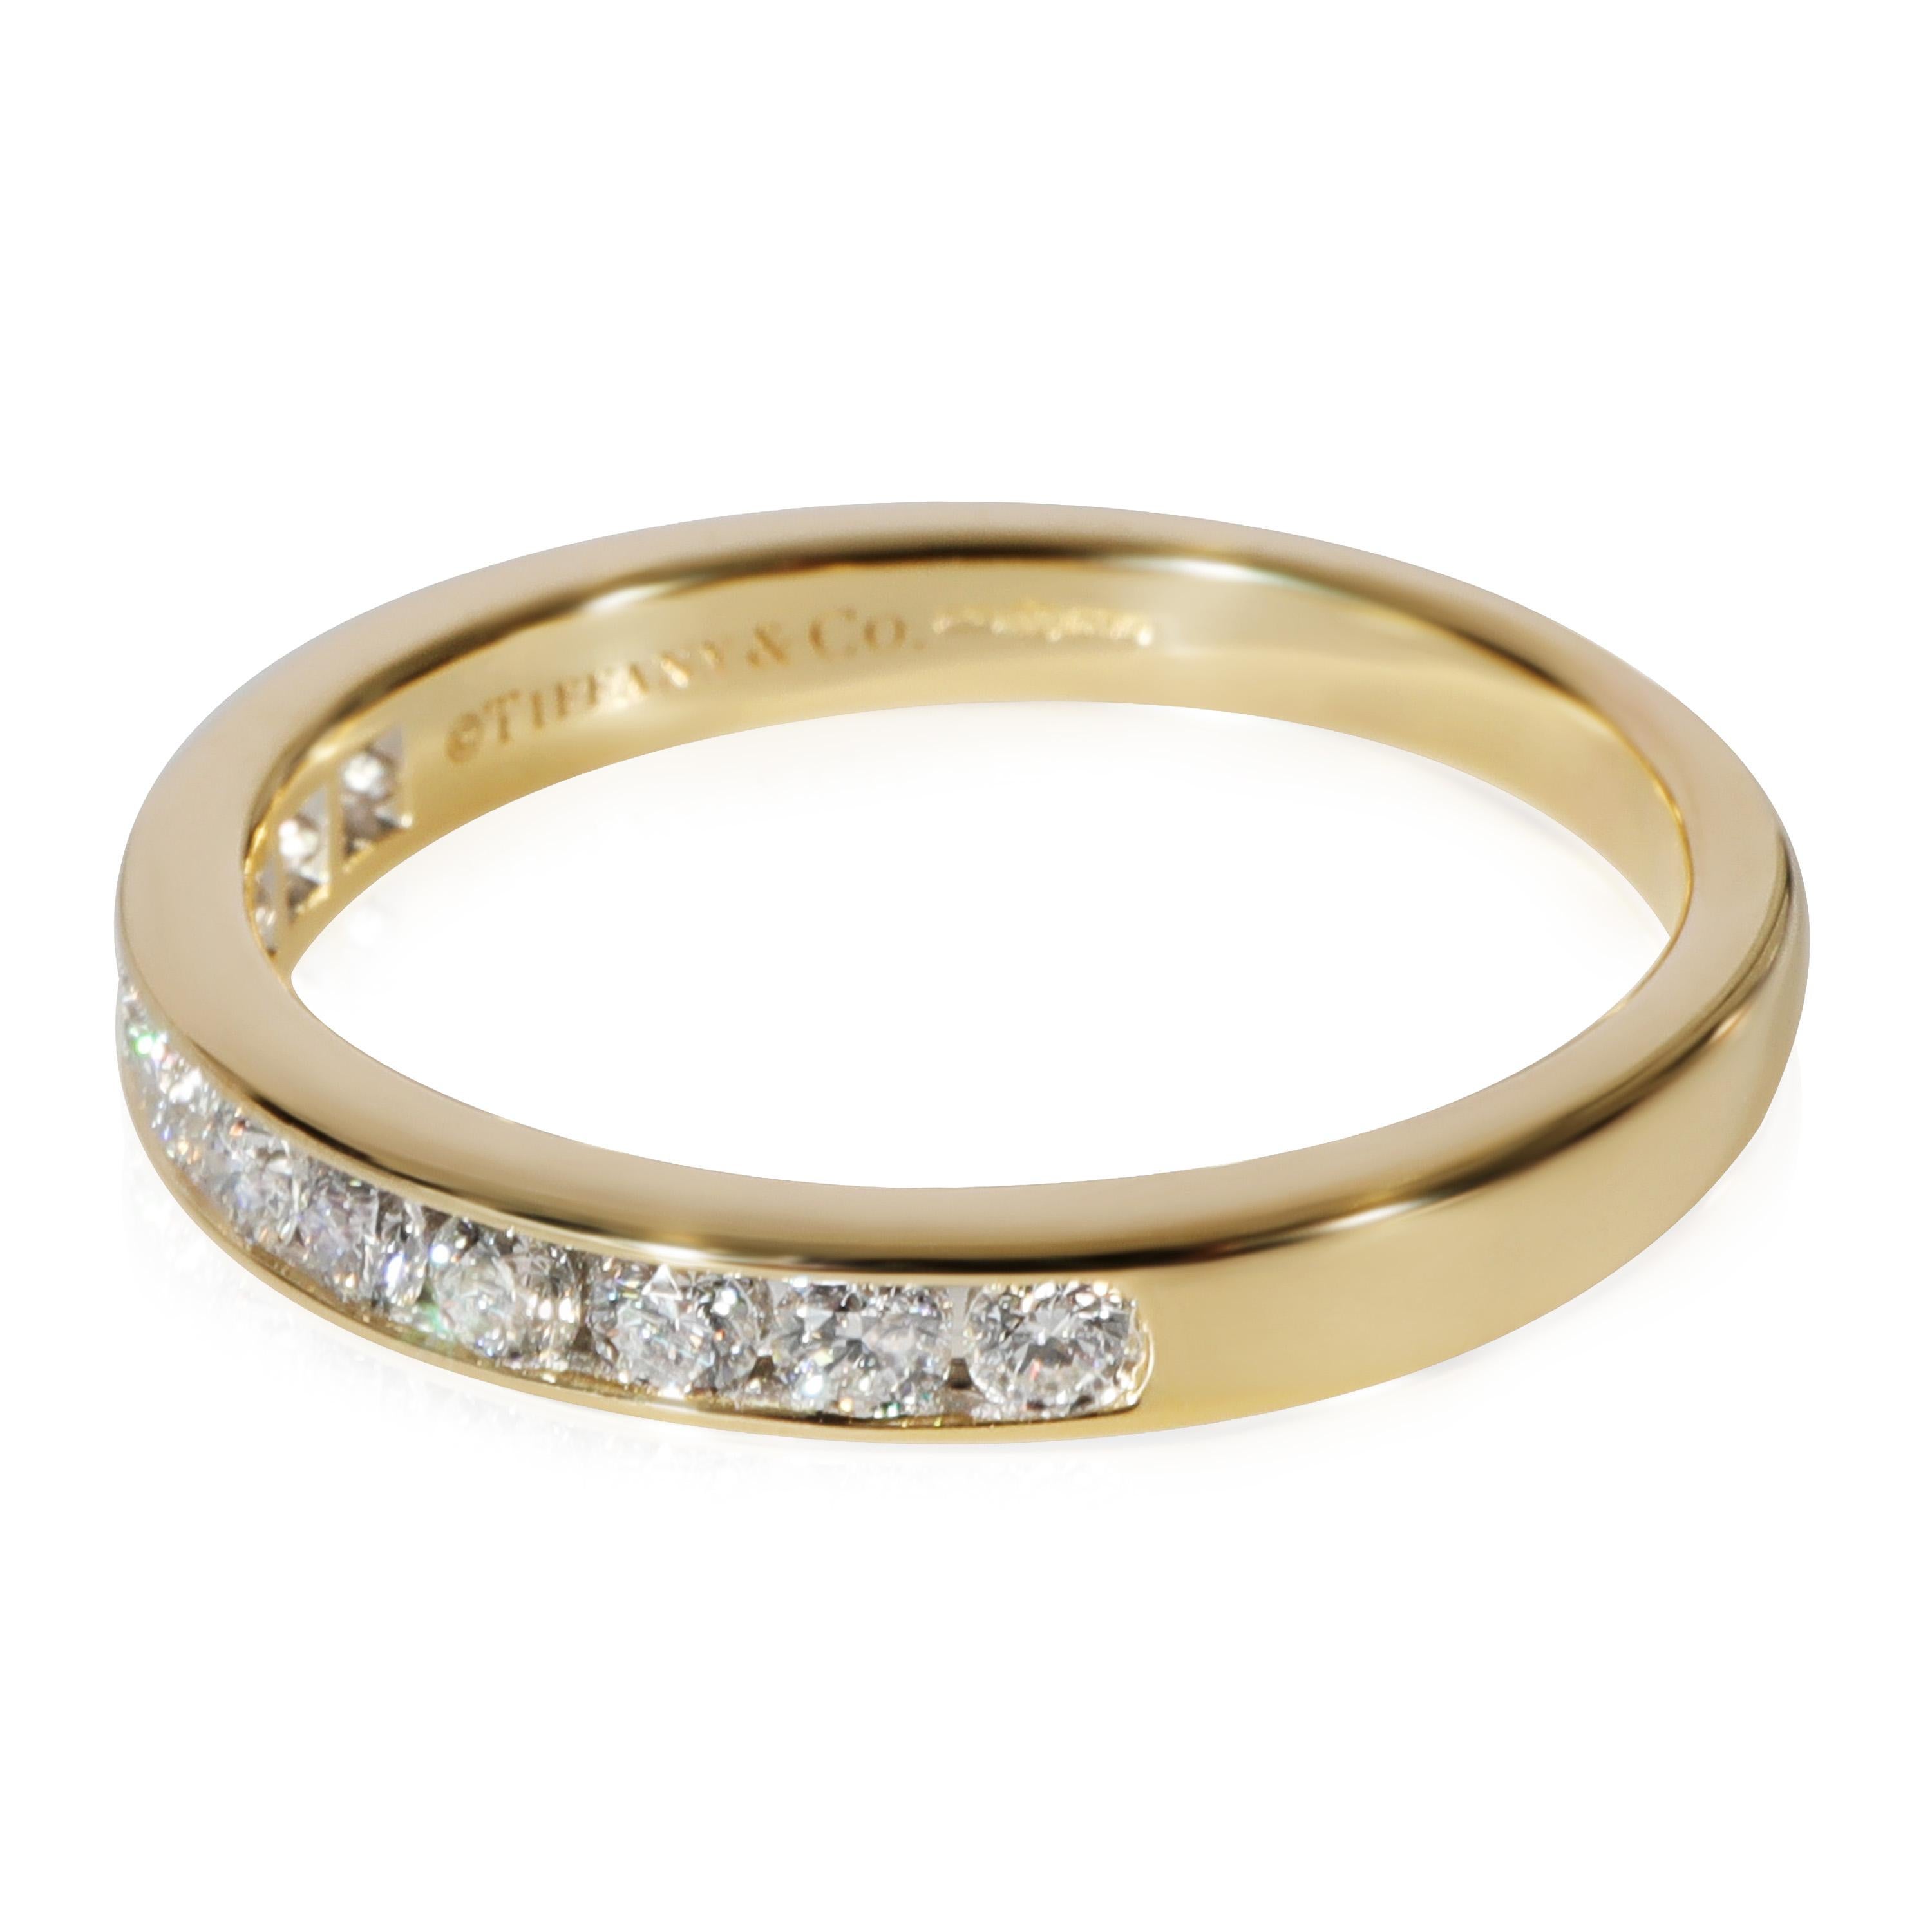 Women's or Men's Tiffany & Co. Diamond Wedding Band in 18k Yellow Gold 0.39 Ctw For Sale